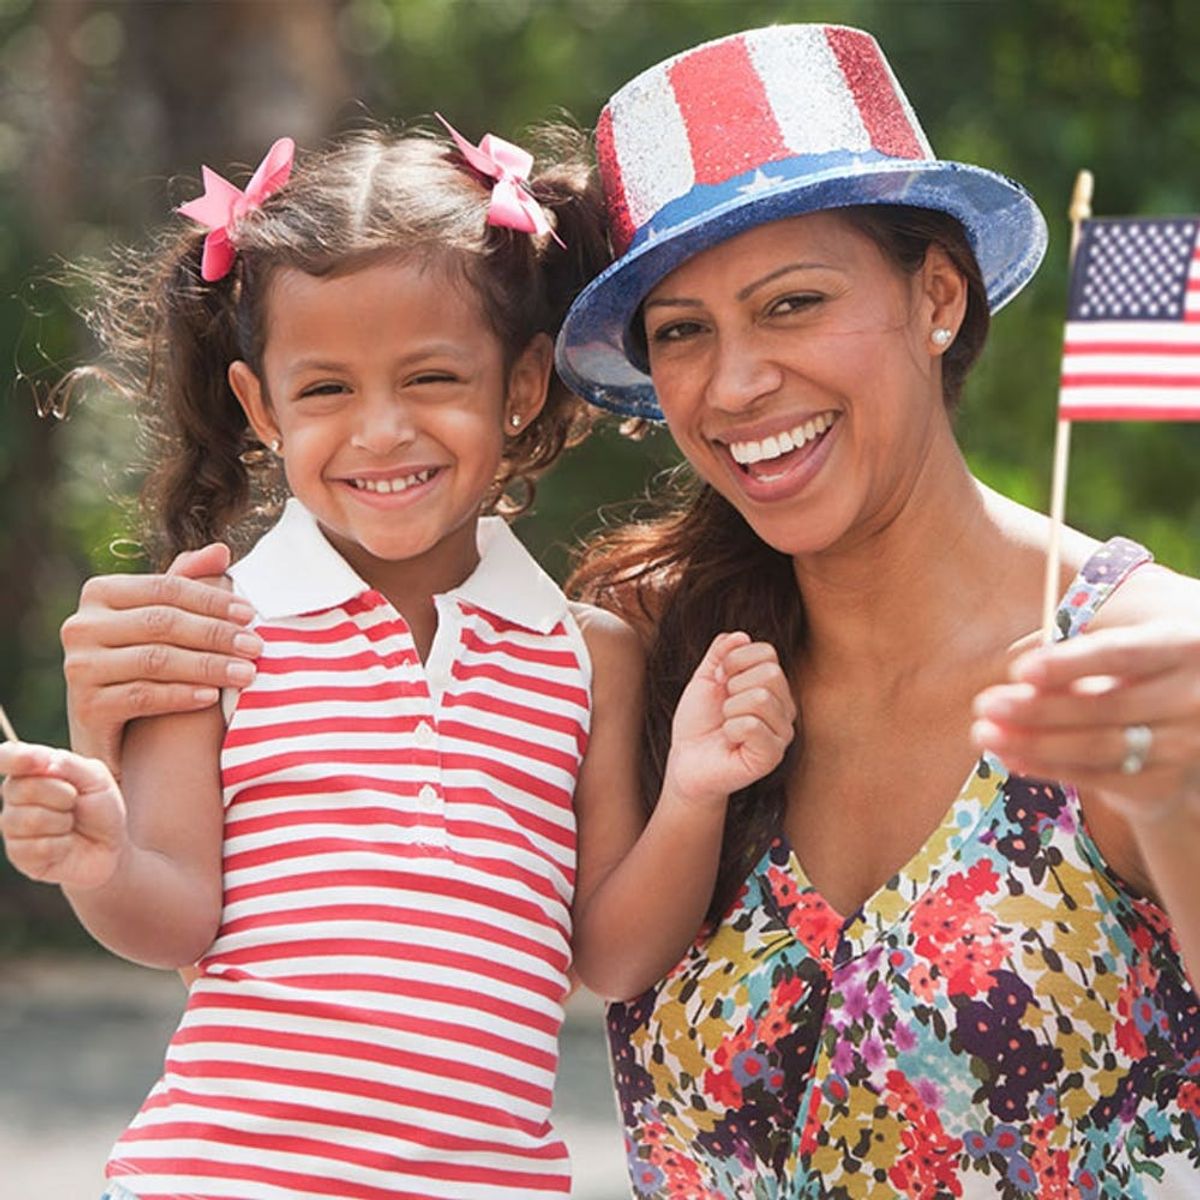 9 Kid-Friendly Activities for Your 4th of July BBQ